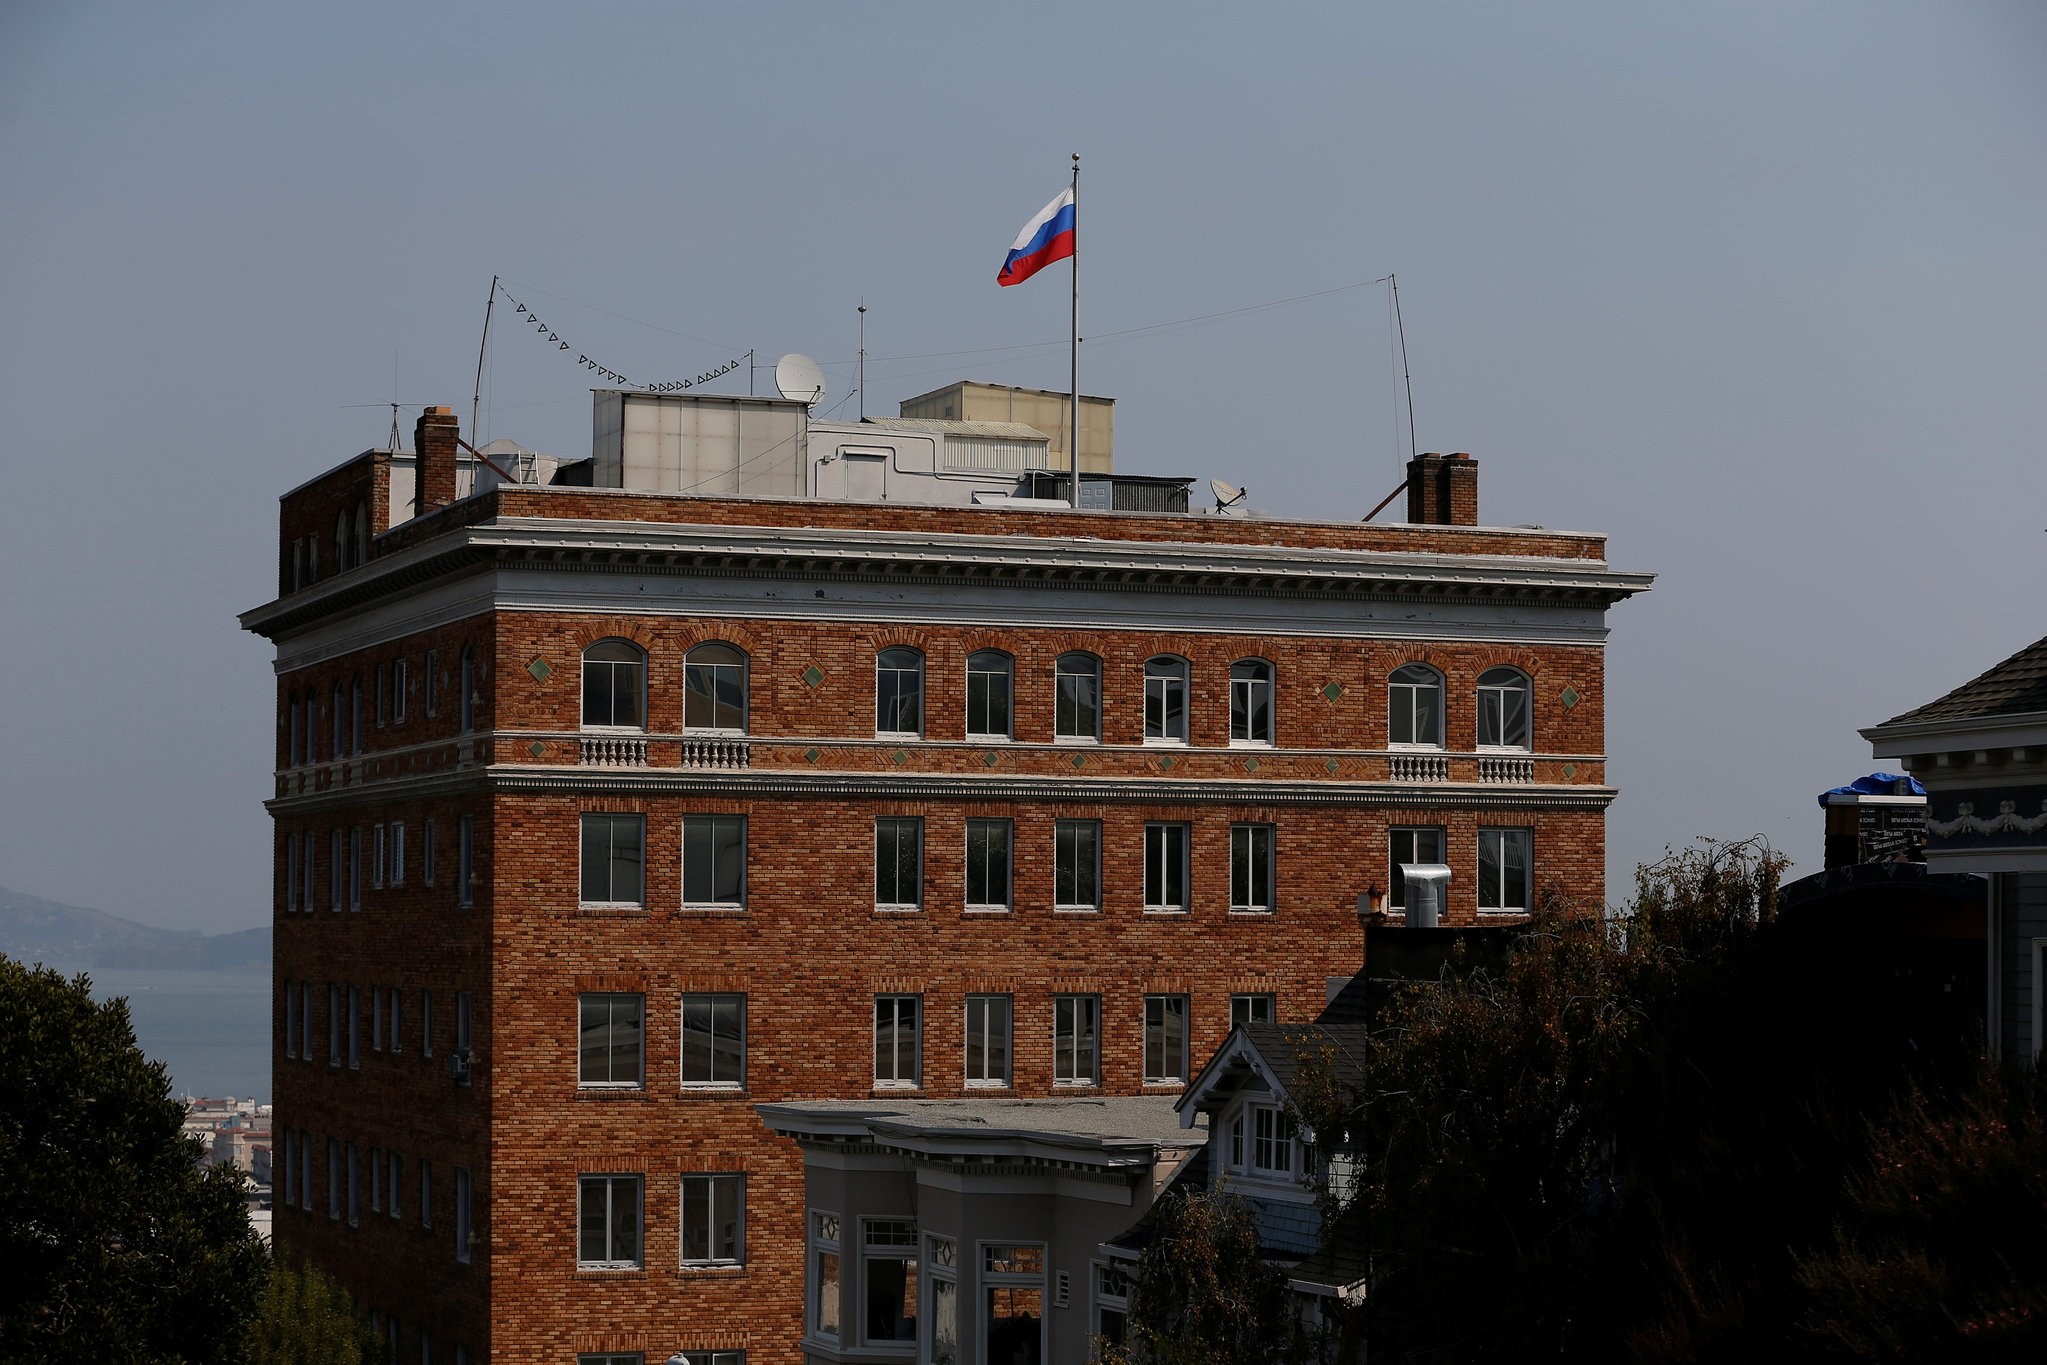 The Consulate General of Russia is seen in San Francisco, California, U.S. on September 2, 2017. (REUTERS Photo)